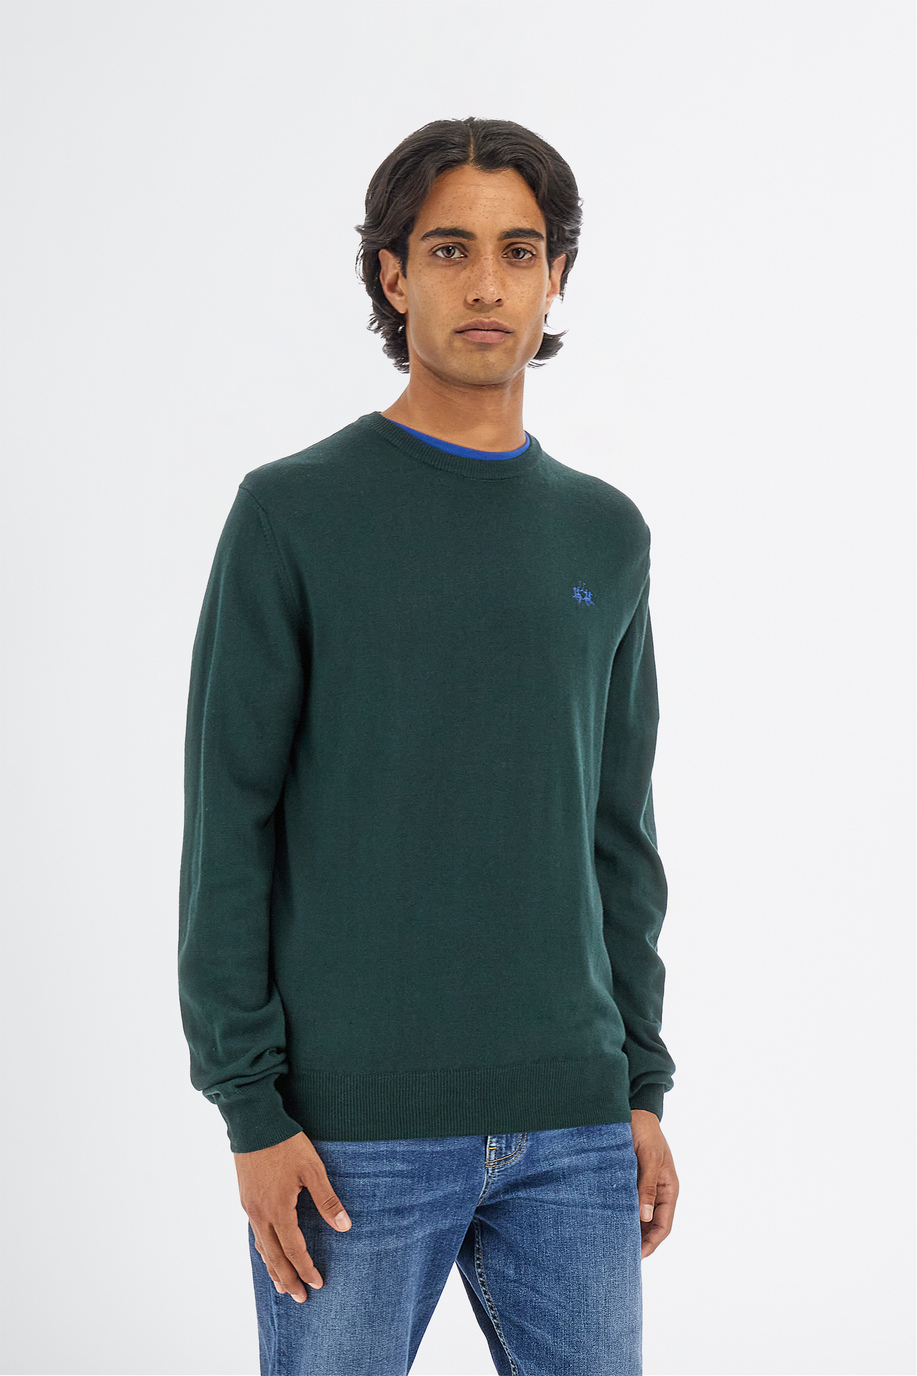 Men’s knitted sweater with long sleeves in cotton and wool blend regular fit - Knitwear | La Martina - Official Online Shop